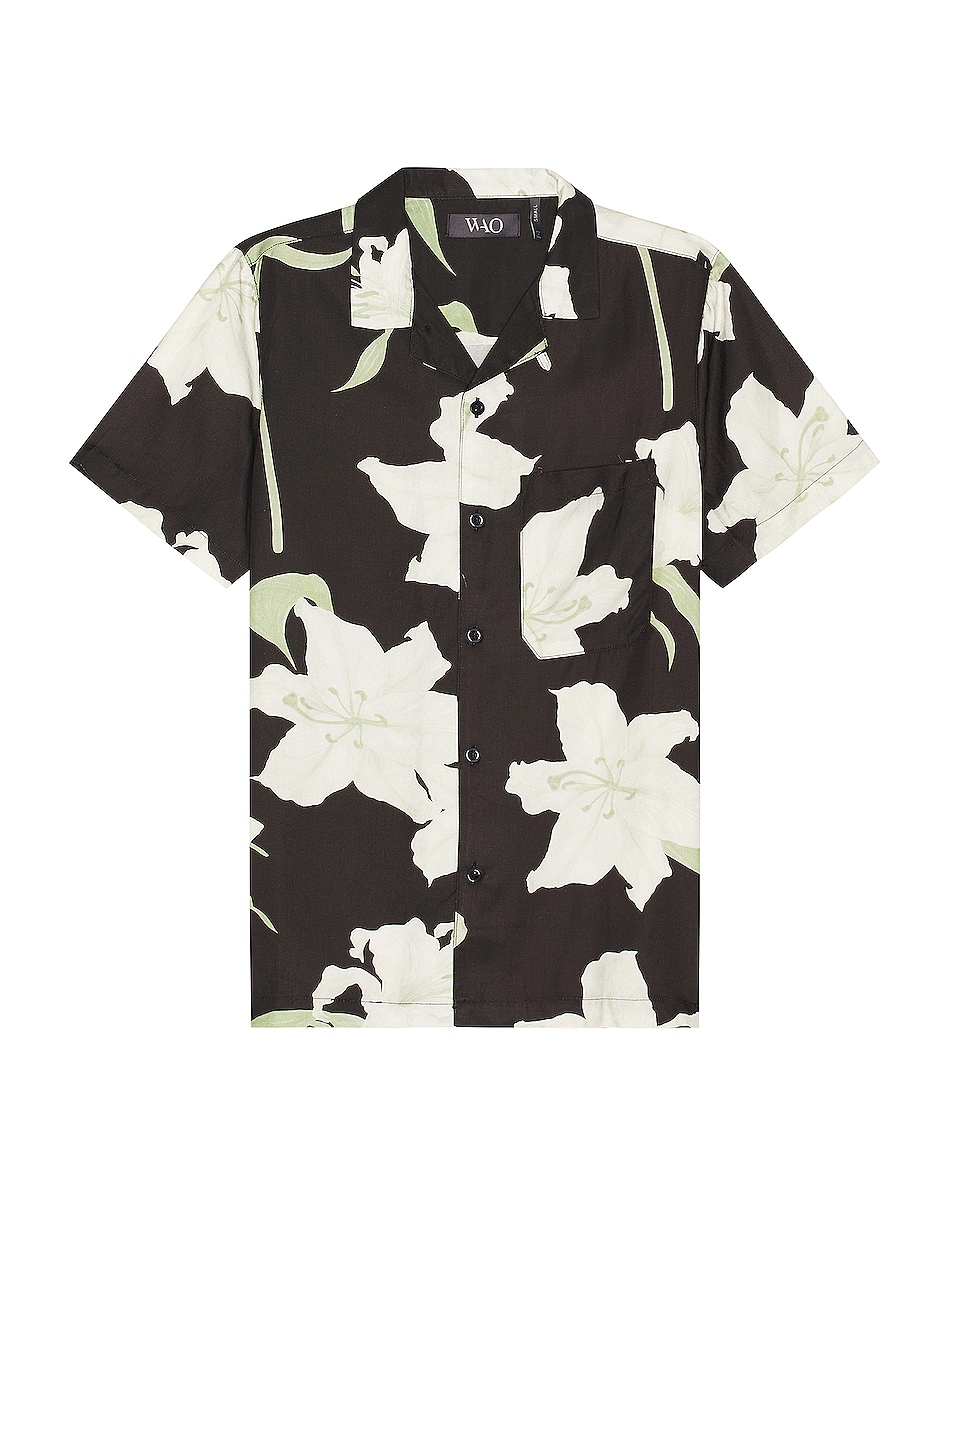 Image 1 of WAO The Camp Shirt in Black White Floral